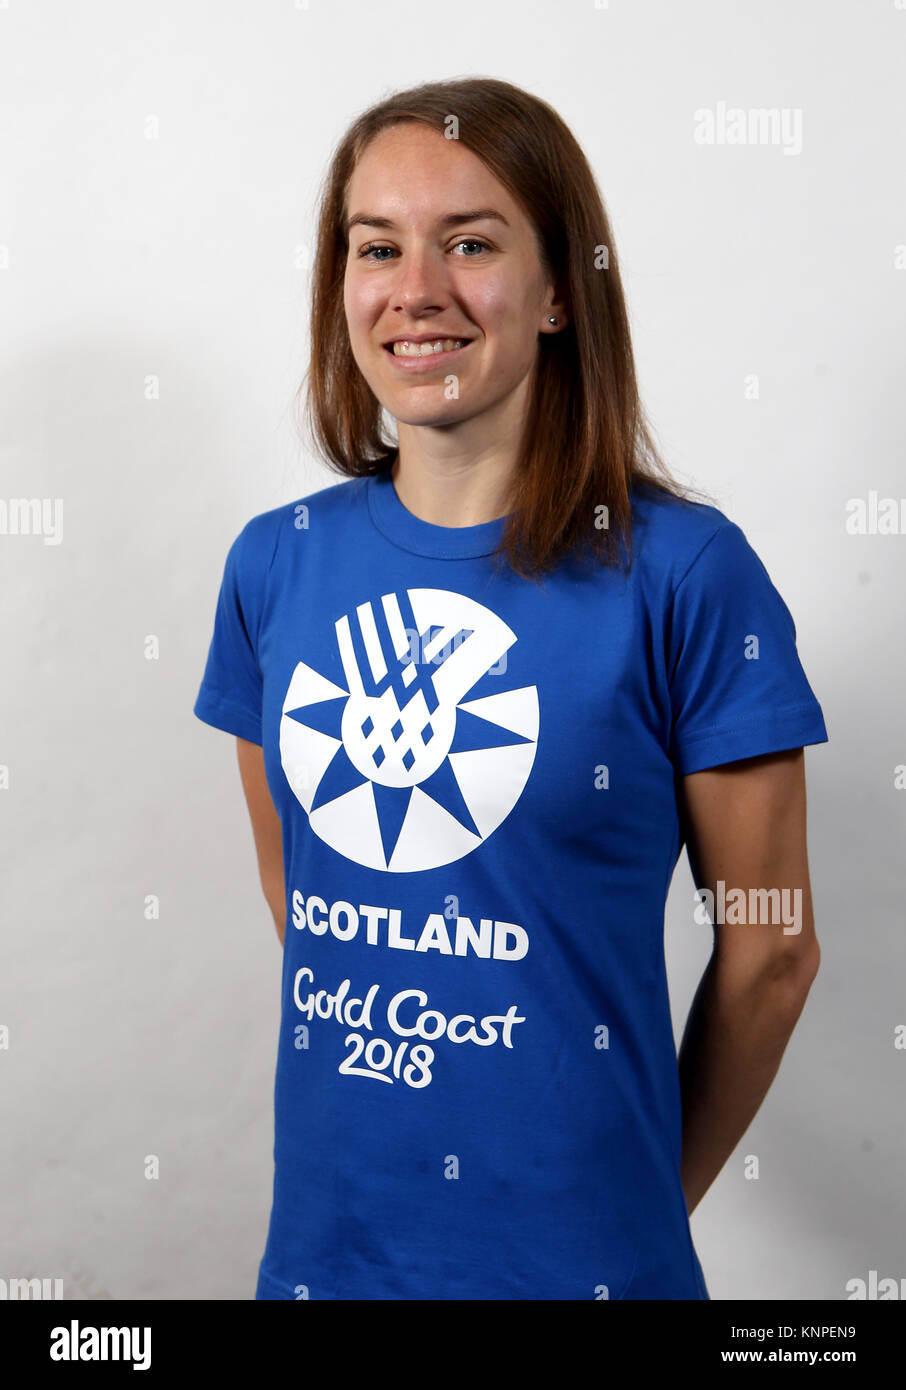 Steph Twell during the Team Scotland track and field athletes announcement for the Gold Coast 2018 Commonwealth Games at the University of Stirling. Stock Photo